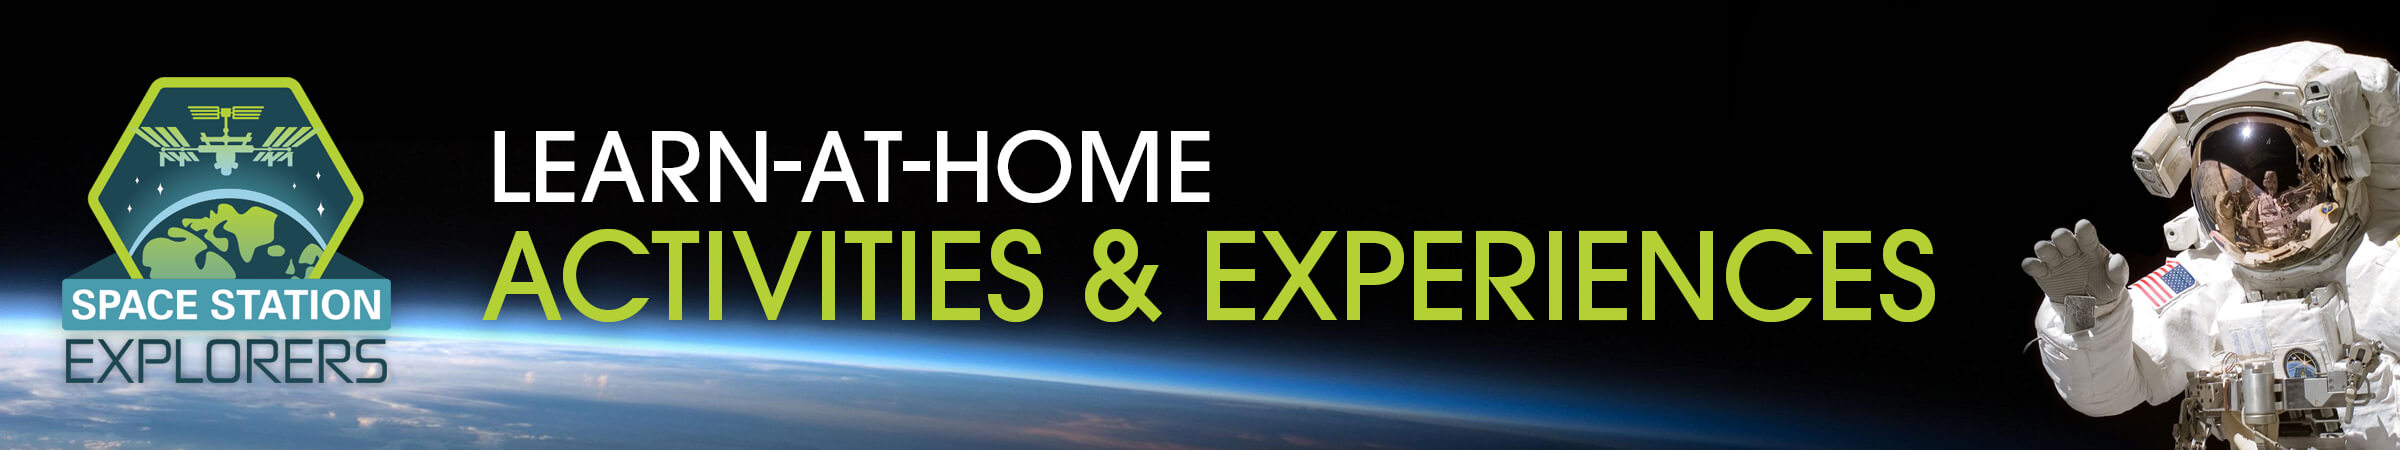 Learn-at-Home Activities and Experiences from Space Station Explorers